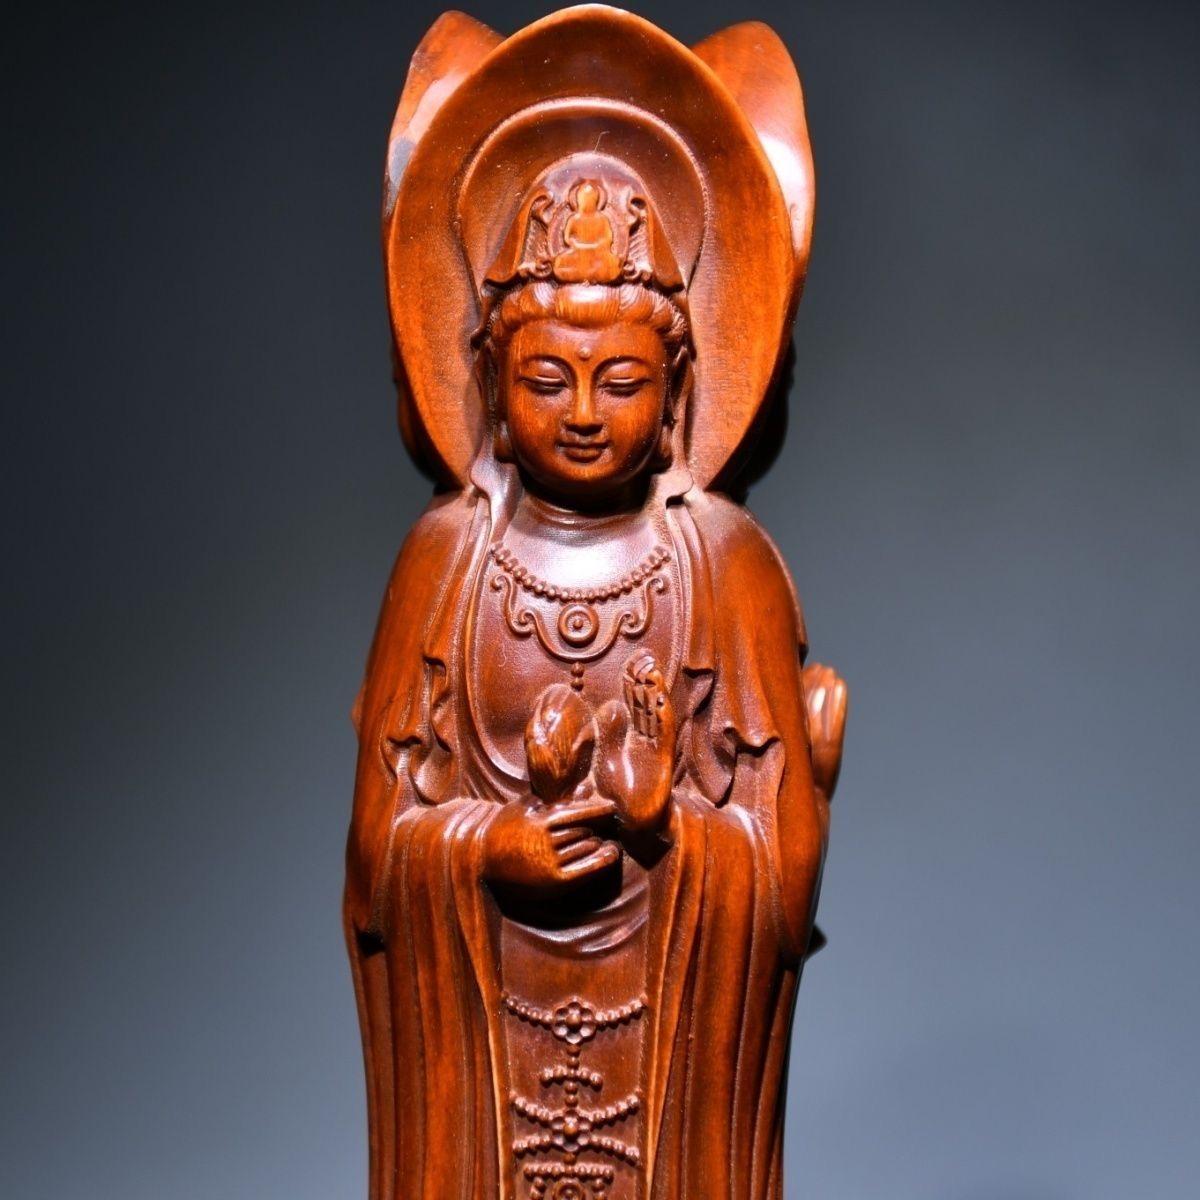 Chinese Vintage Wood Carving Three Sided Guan Yin Buddhas Statue For Sale 1